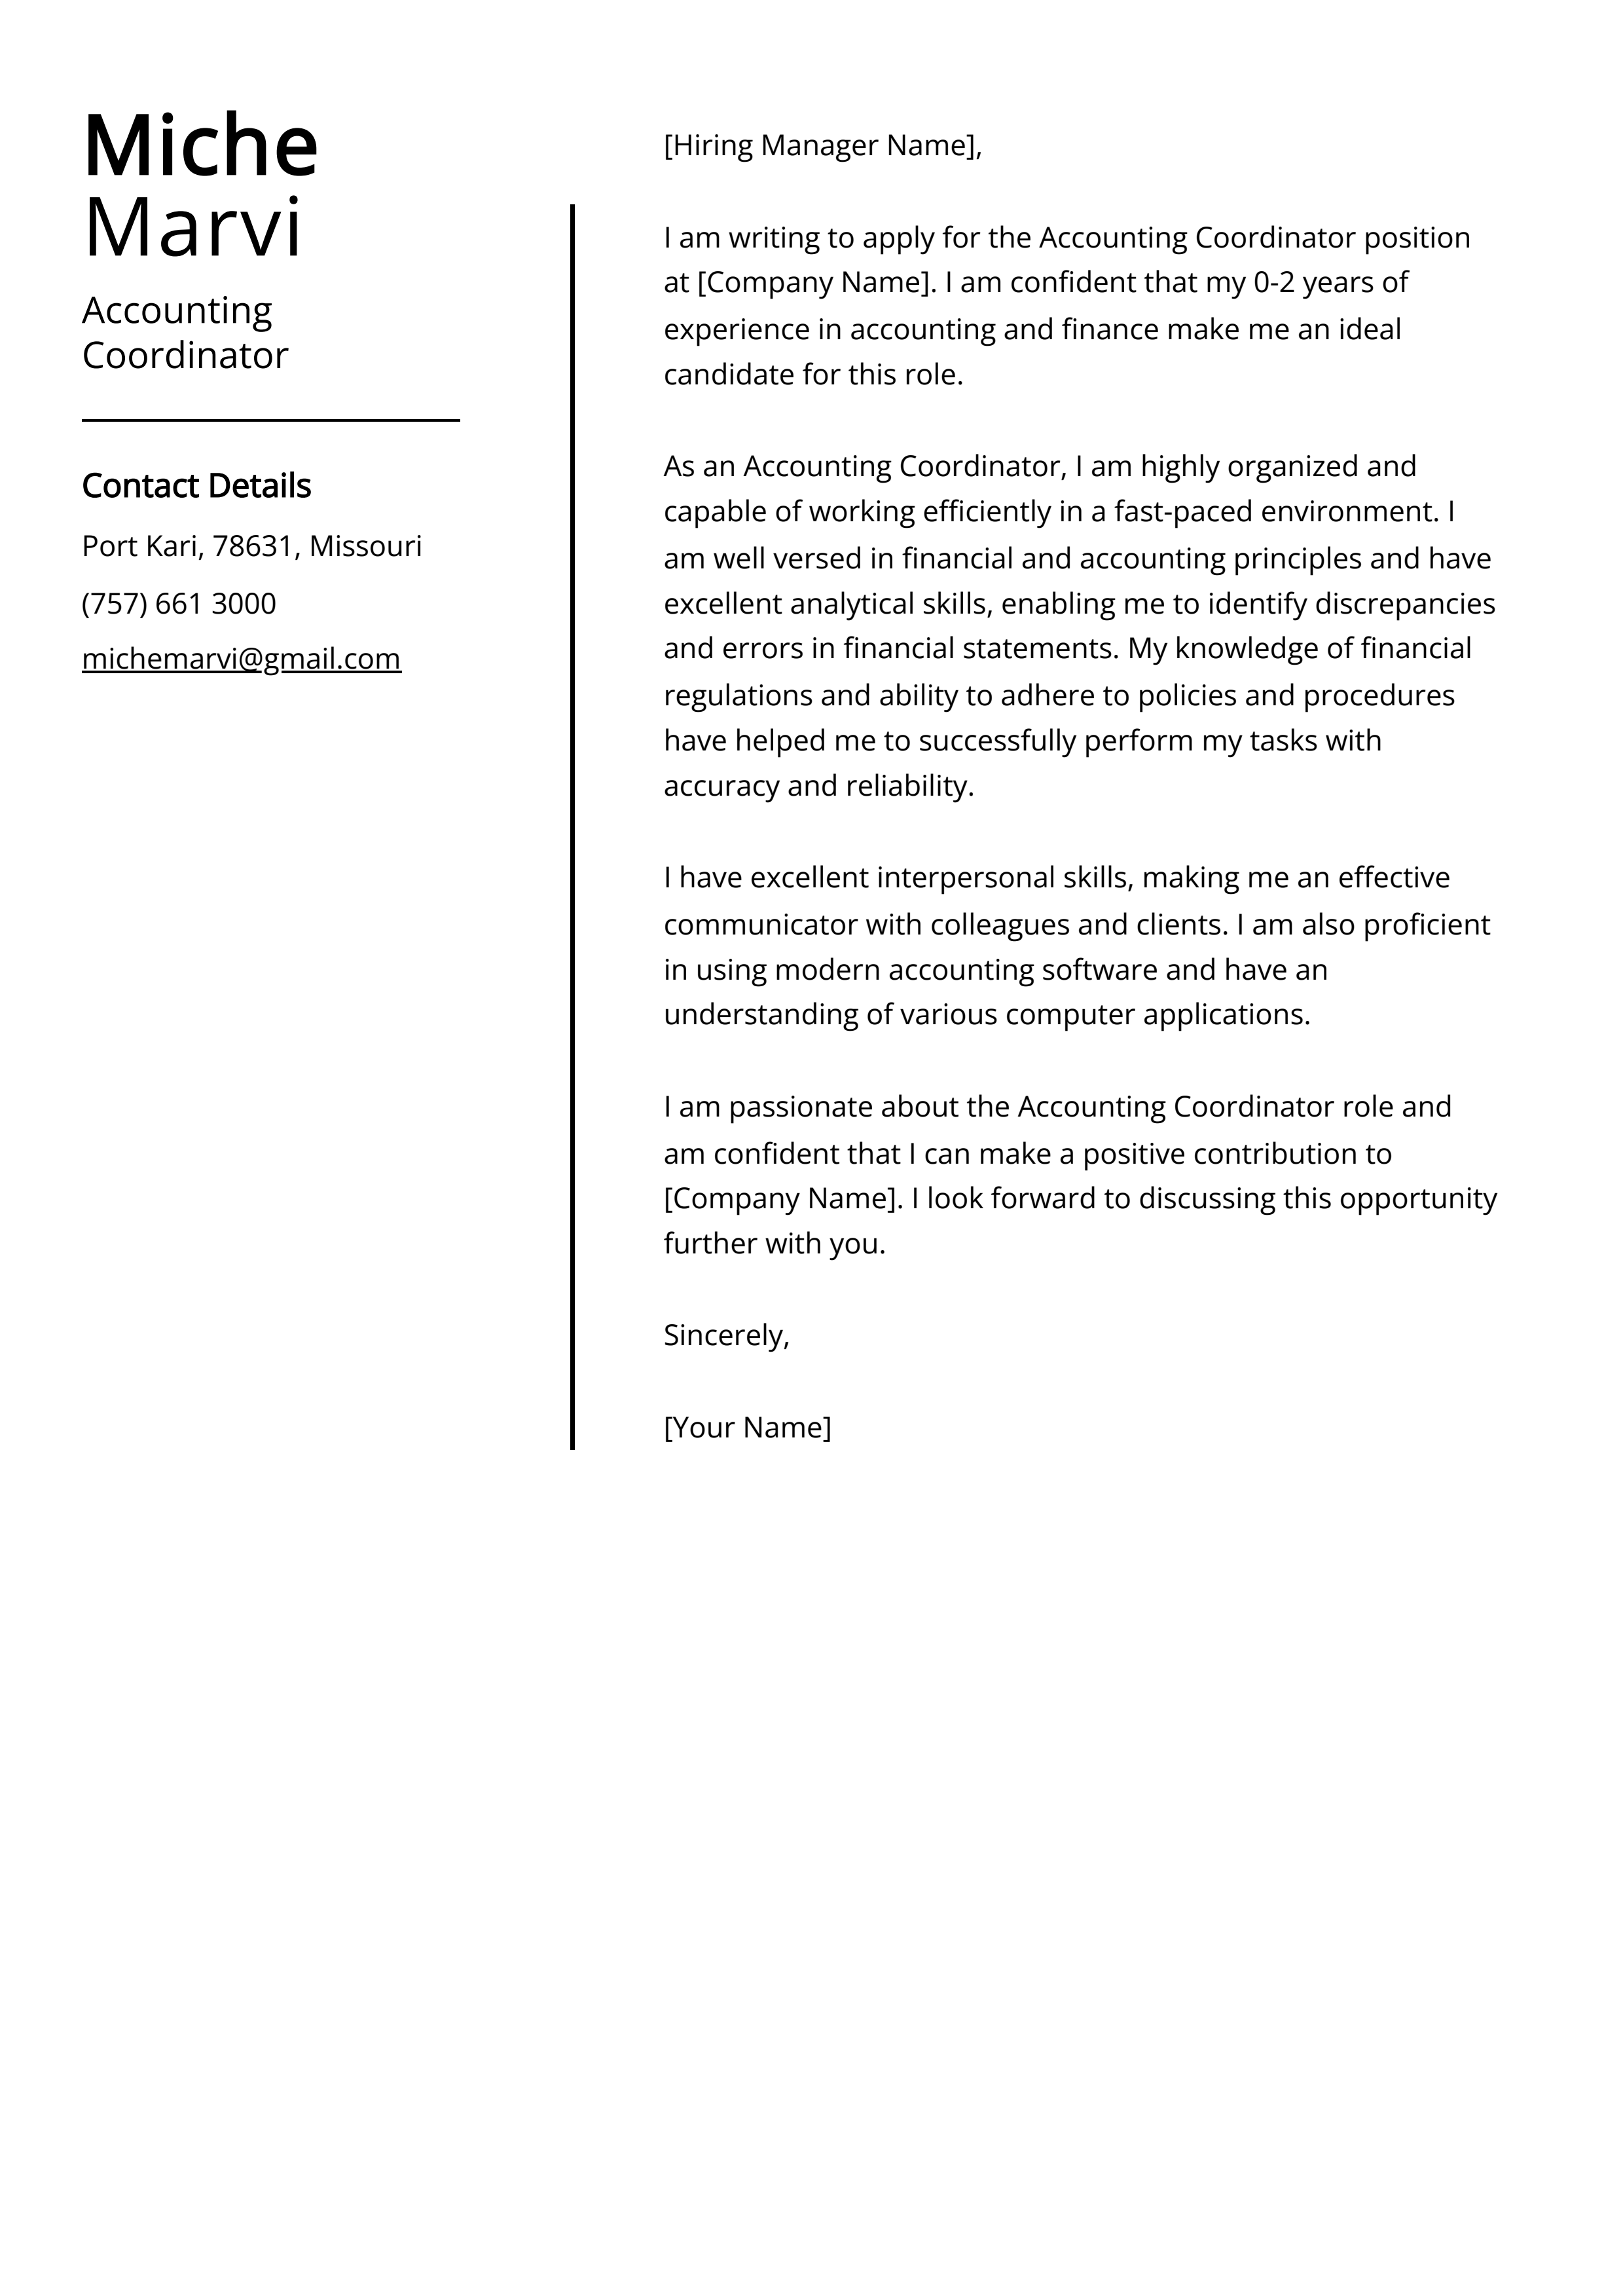 Accounting Coordinator Cover Letter Example